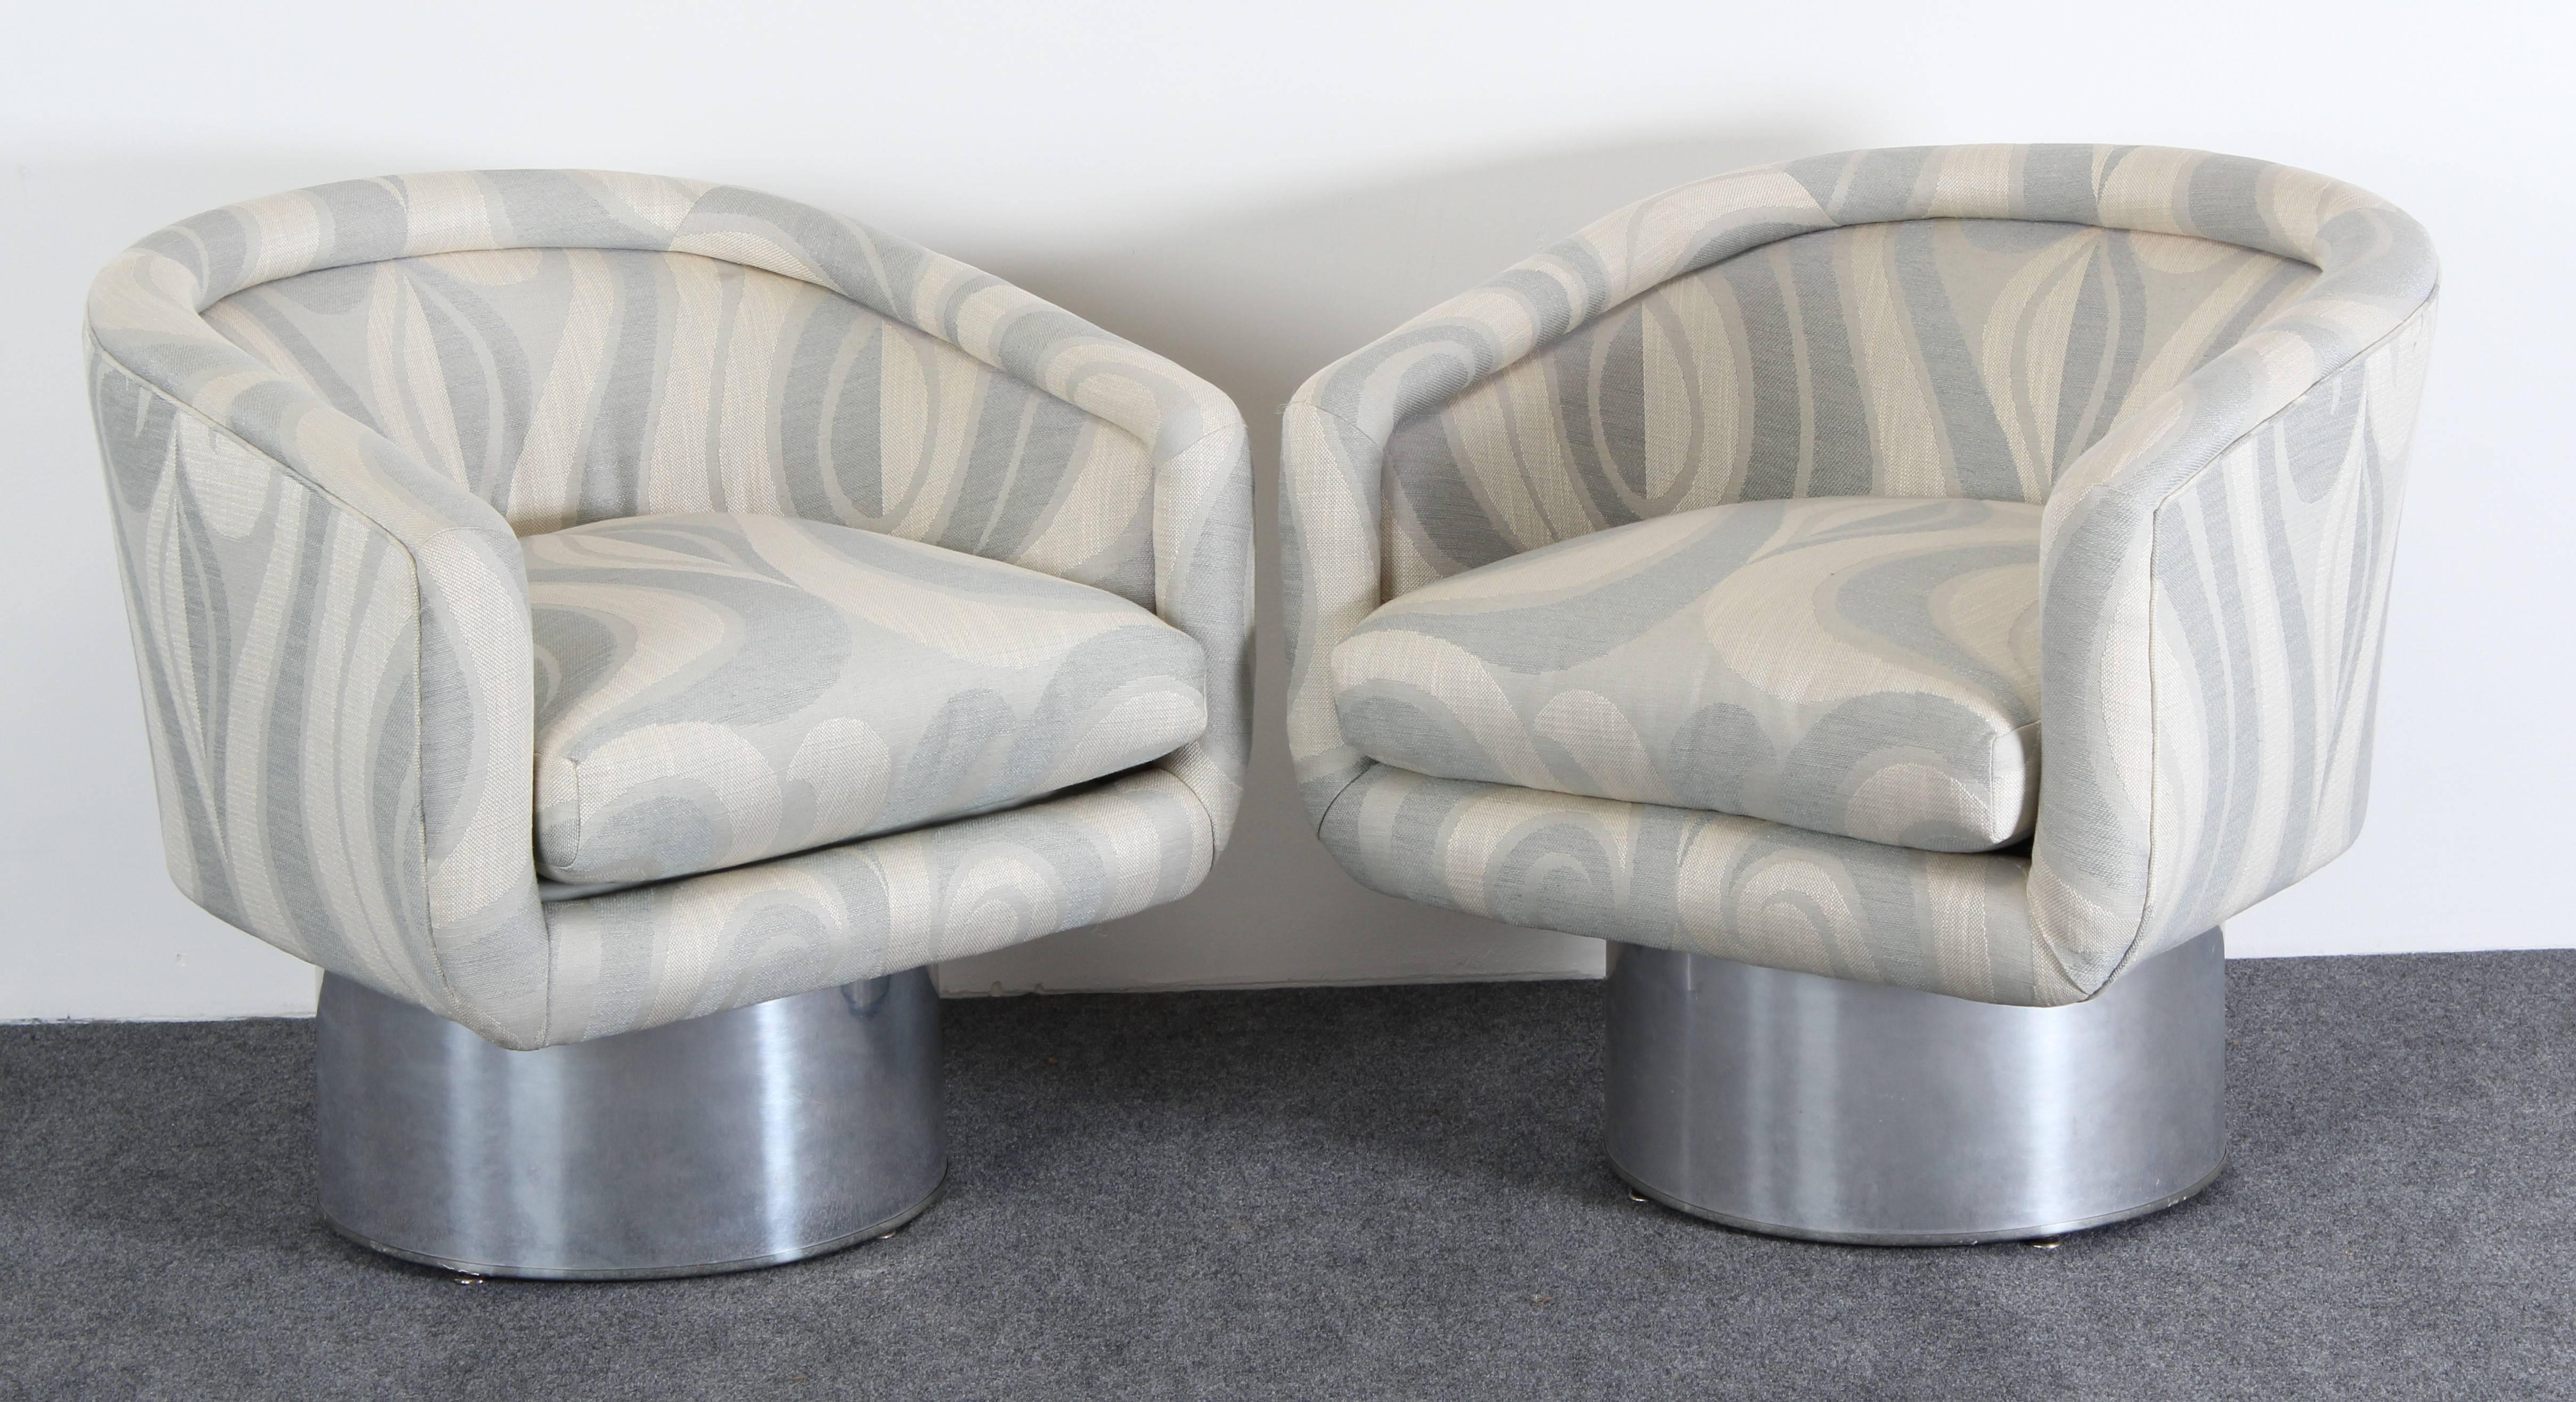 A stunning pair of Leon Rosen for Pace Swivel Lounge Chairs, circa 1970s. The pedestal base is made of polished solid sheet aluminum. The fabric is in overall very good condition. The chairs are structurally sound and nicely upholstered ready to be